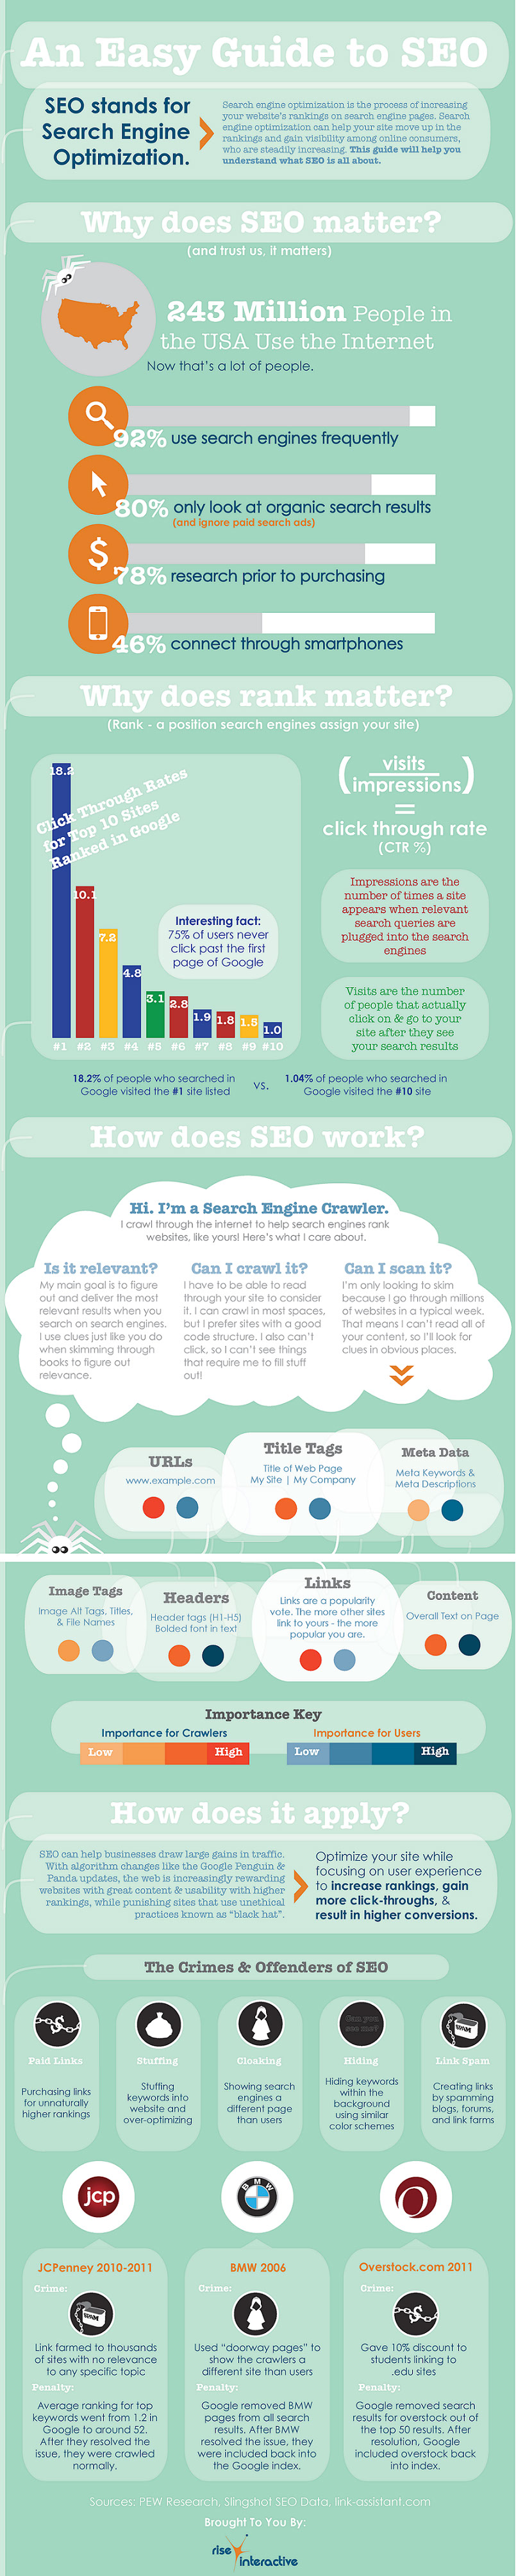 An-Easy-Guide-To-Seo-infographic